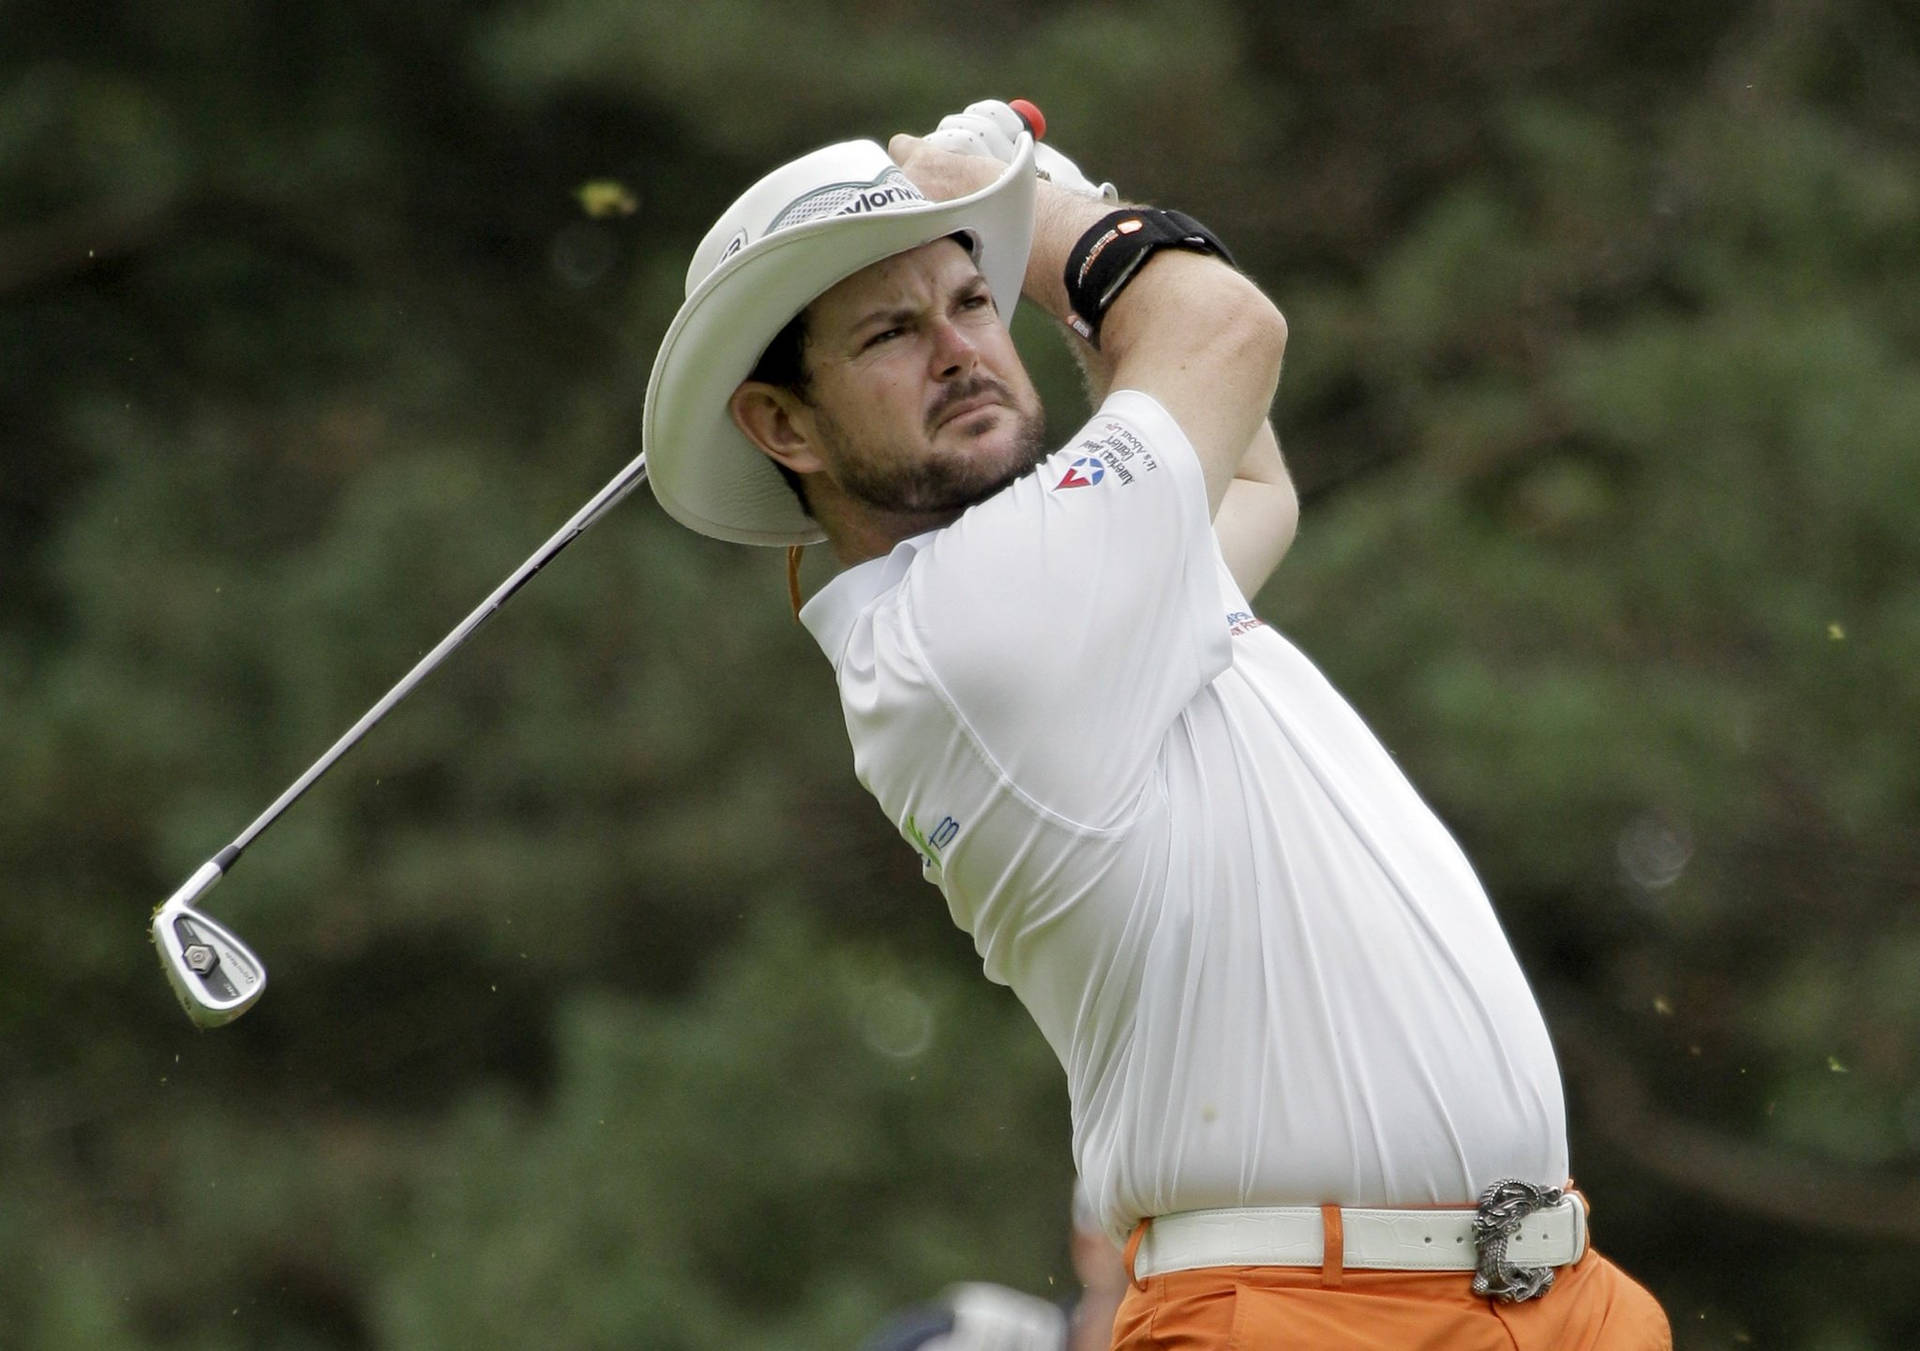 Rory Sabbatini in Mid-Swing on the Golf Green Wallpaper